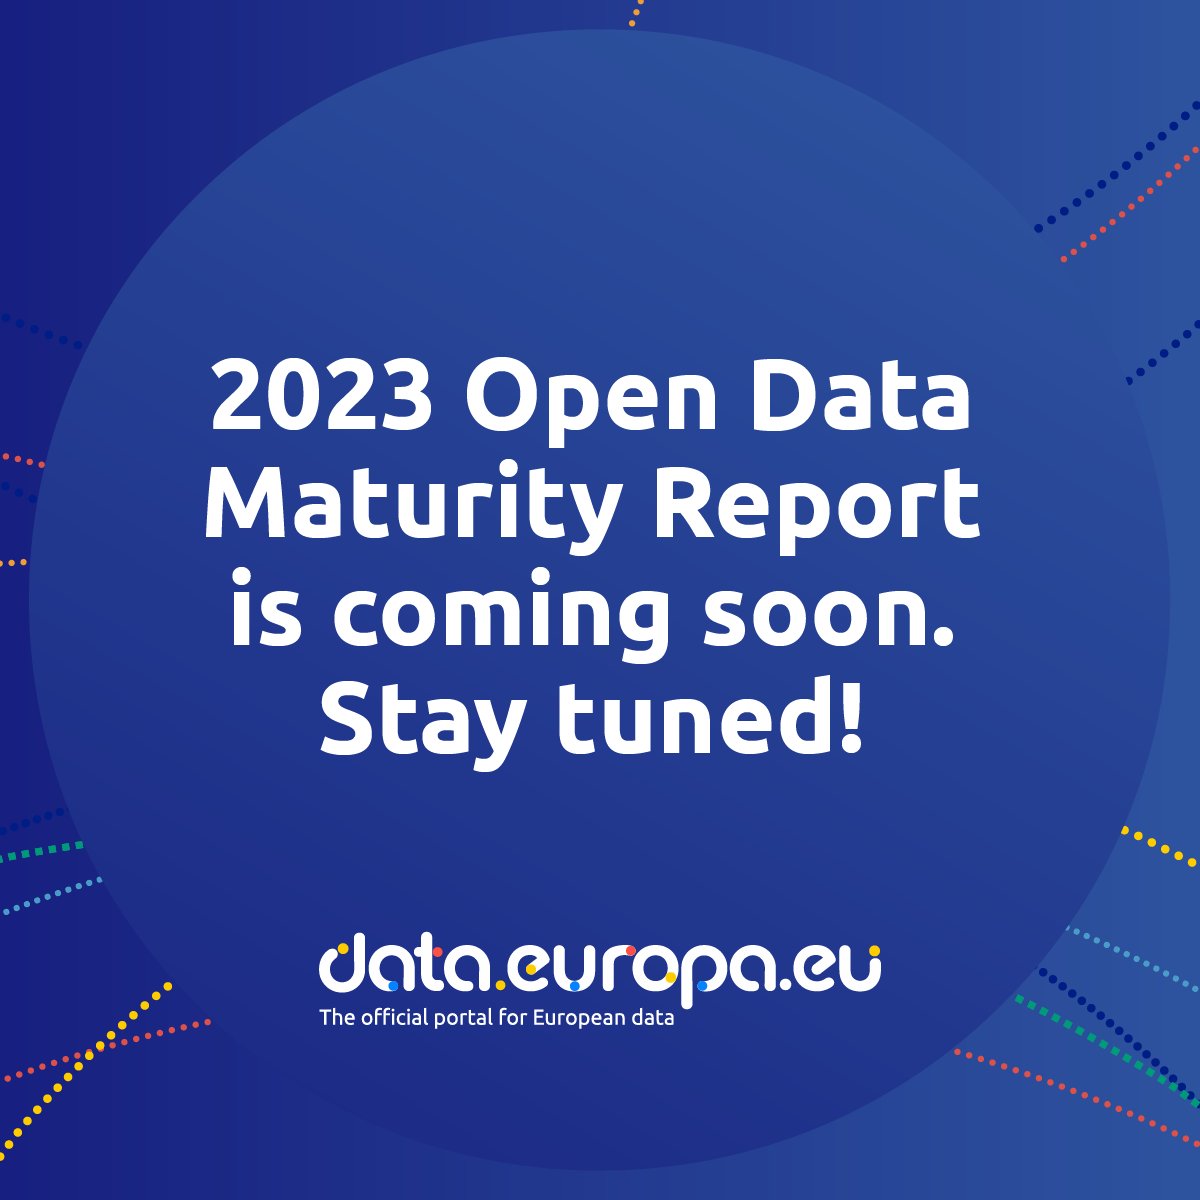 Our 2023 Open Data Maturity assessment is coming out in a week's time! 

Get ready for the latest insights and trends in the European #OpenData landscape. Stay tuned to learn about the developments in your country.

#EUOpenData #OpenDataMaturity #ODM2023
@JHahnEU @ThierryBreton